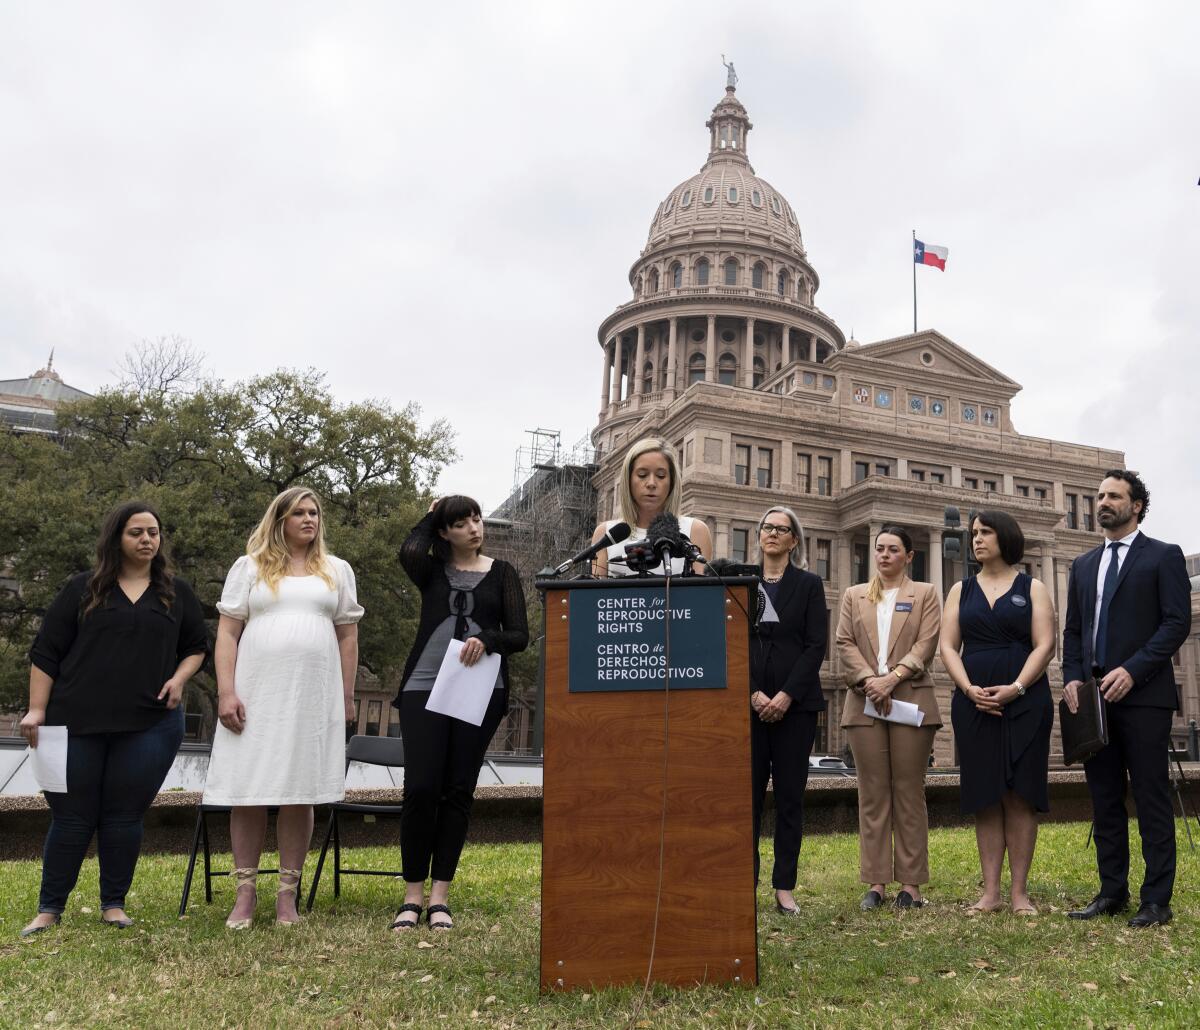 A woman speaks at a lectern in front of the state Capitol in Austin, Texas.